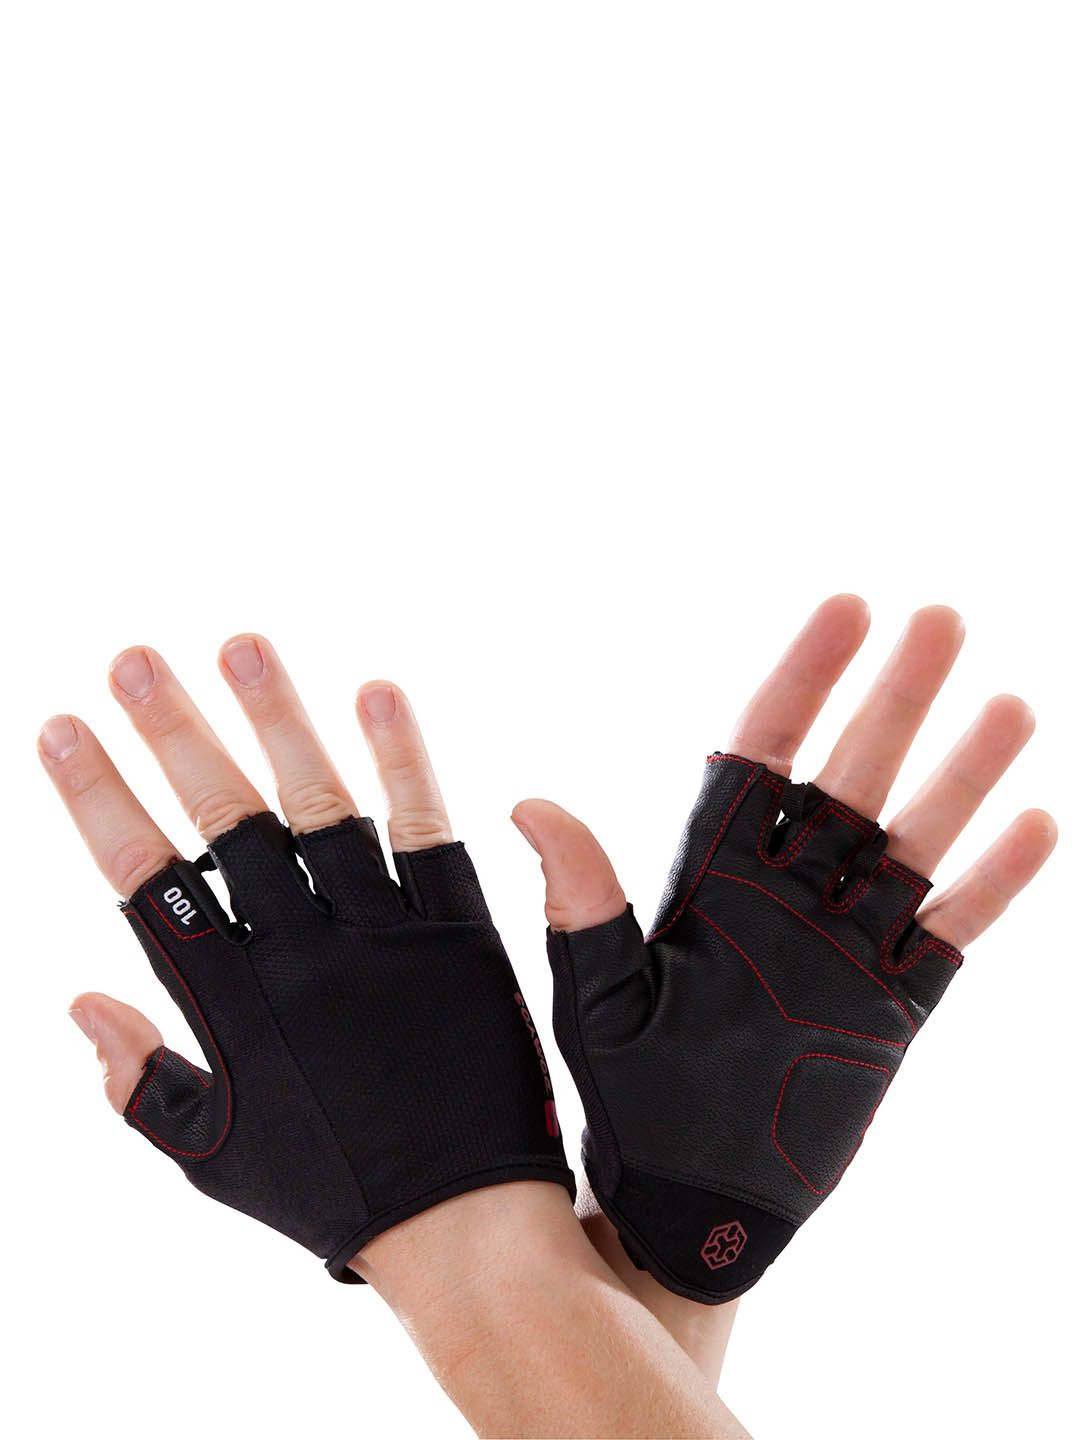 Domyos By Decathlon Black Solid Weight Training Gym Gloves Price in India